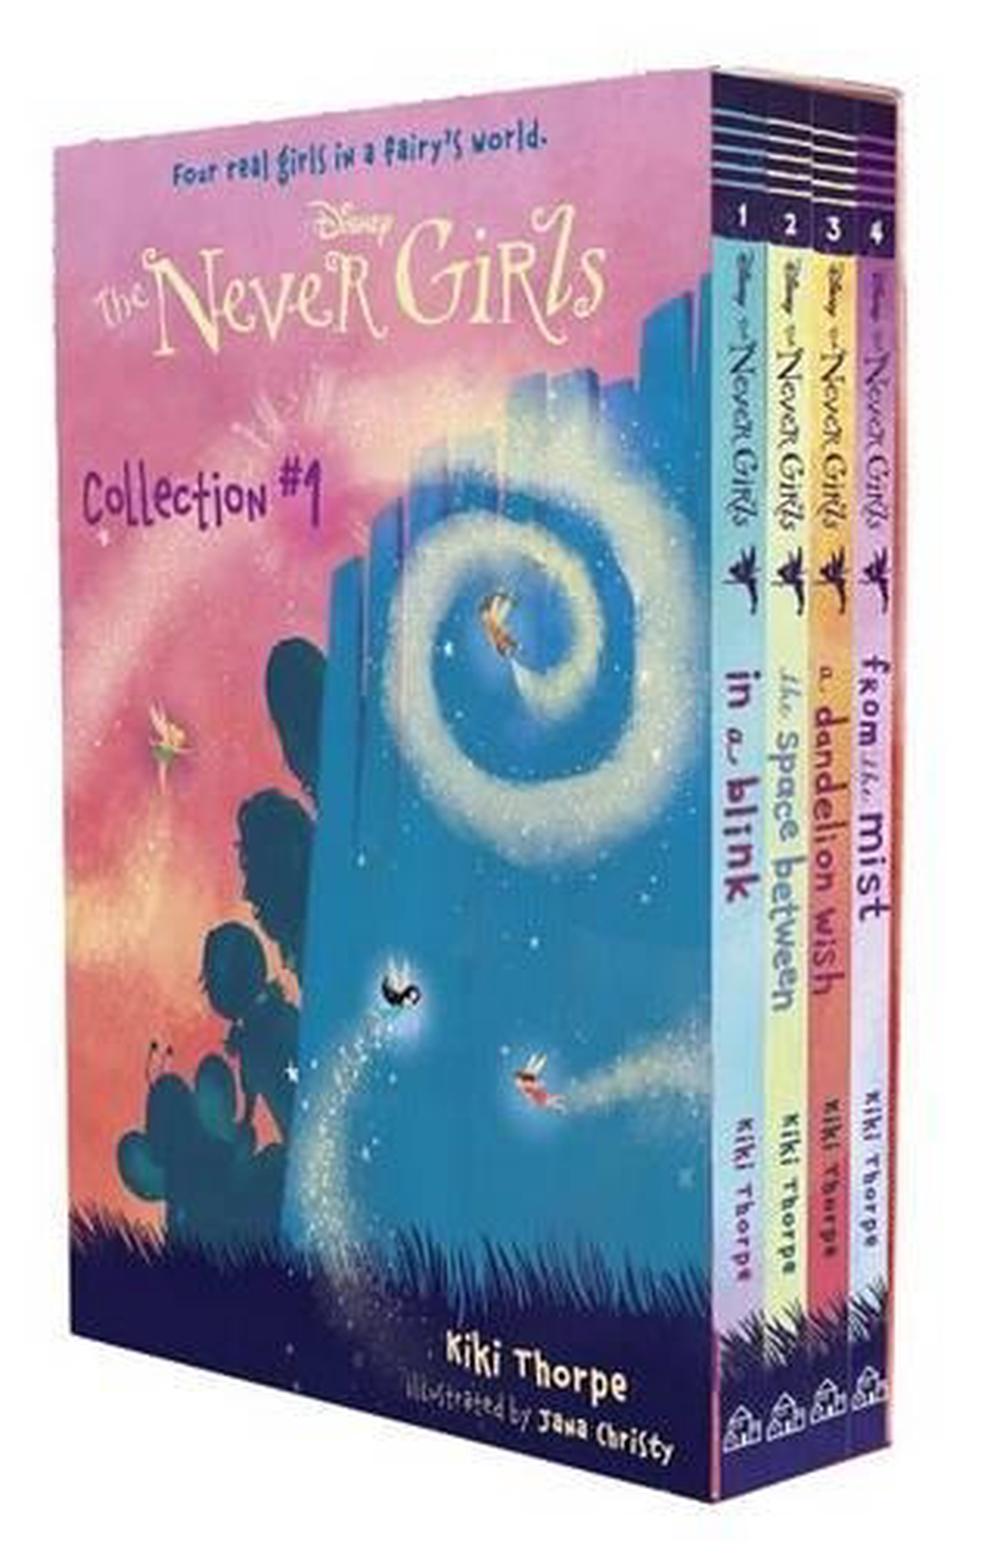 The Never Girls Collection 1 By Kiki Thorpe English Boxed Set Book 